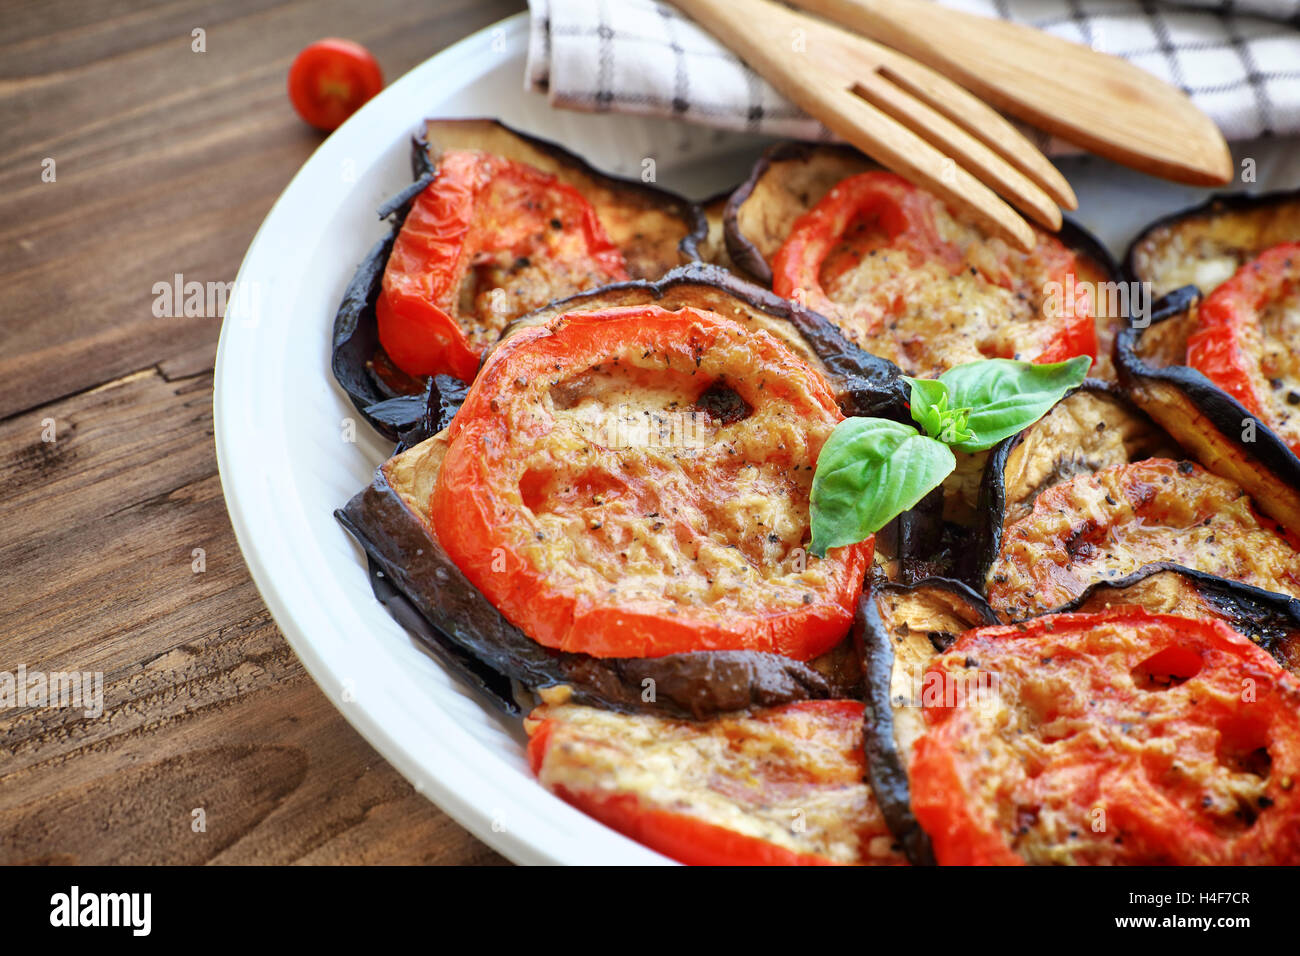 Tasty pizza topping, roasted aubergine with tomatoes and basil on the plate on the wooden table, delicious homemade food Stock Photo